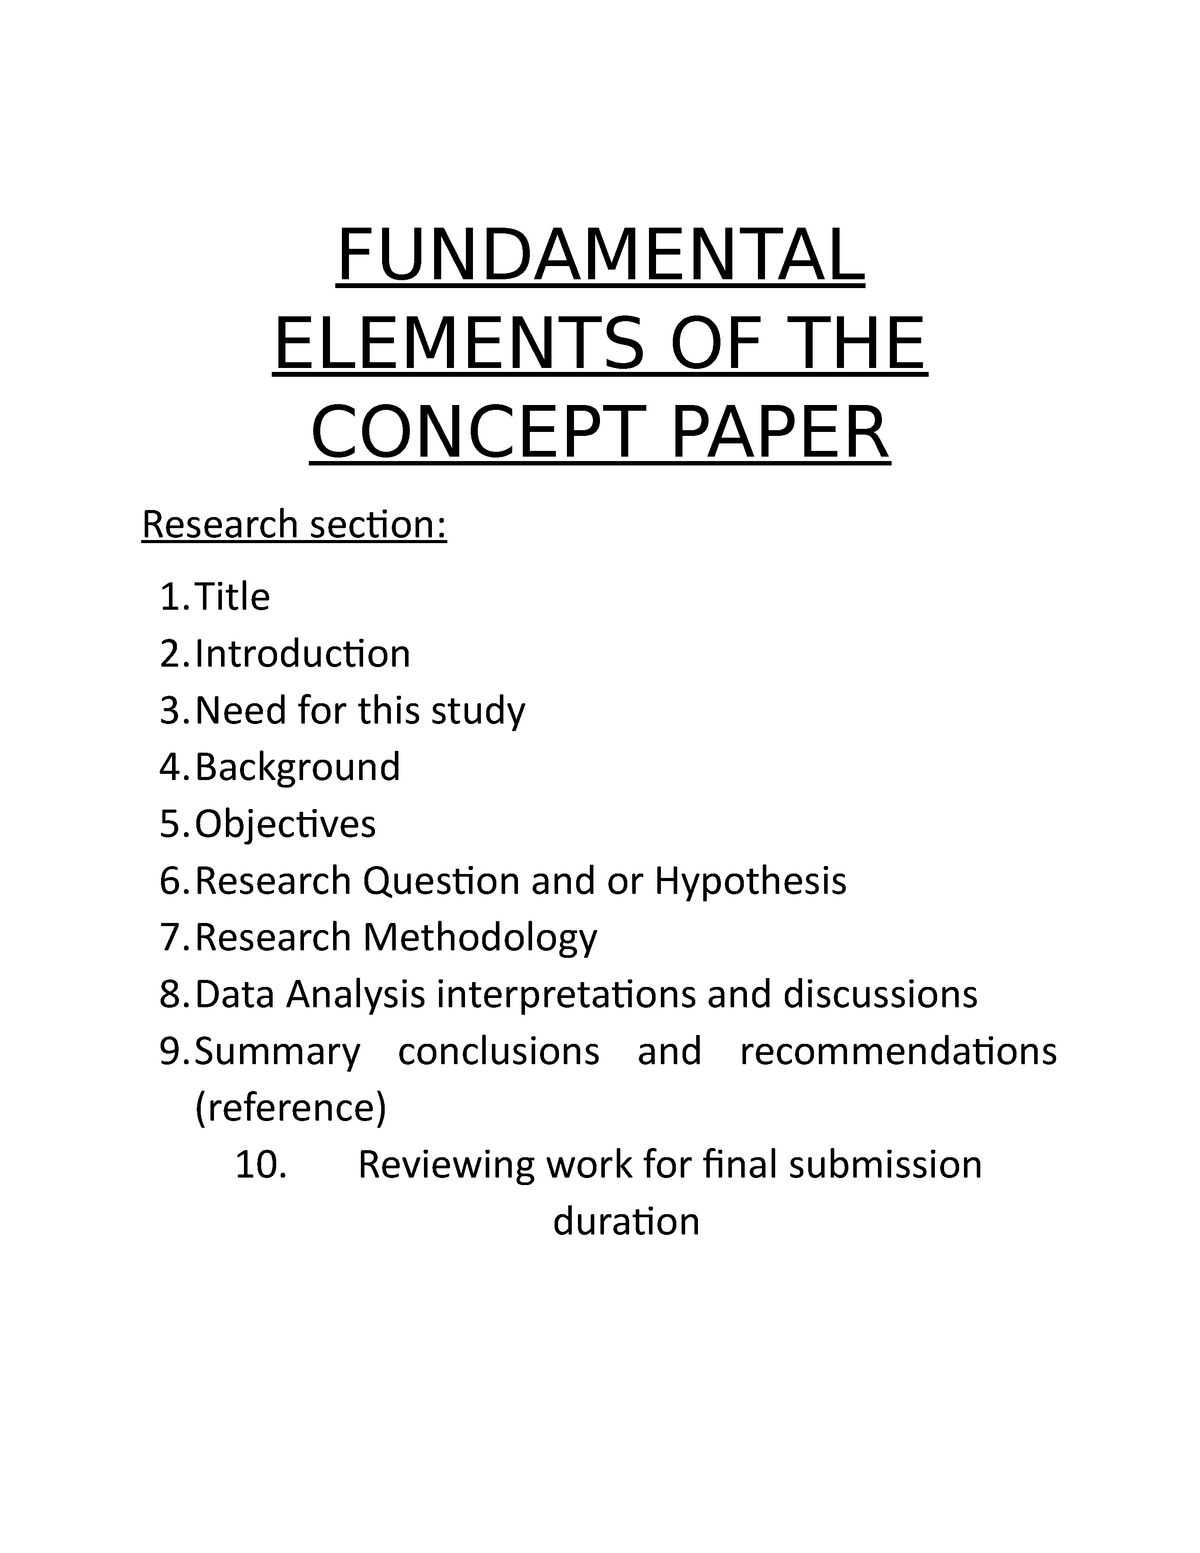 example of a research concept paper